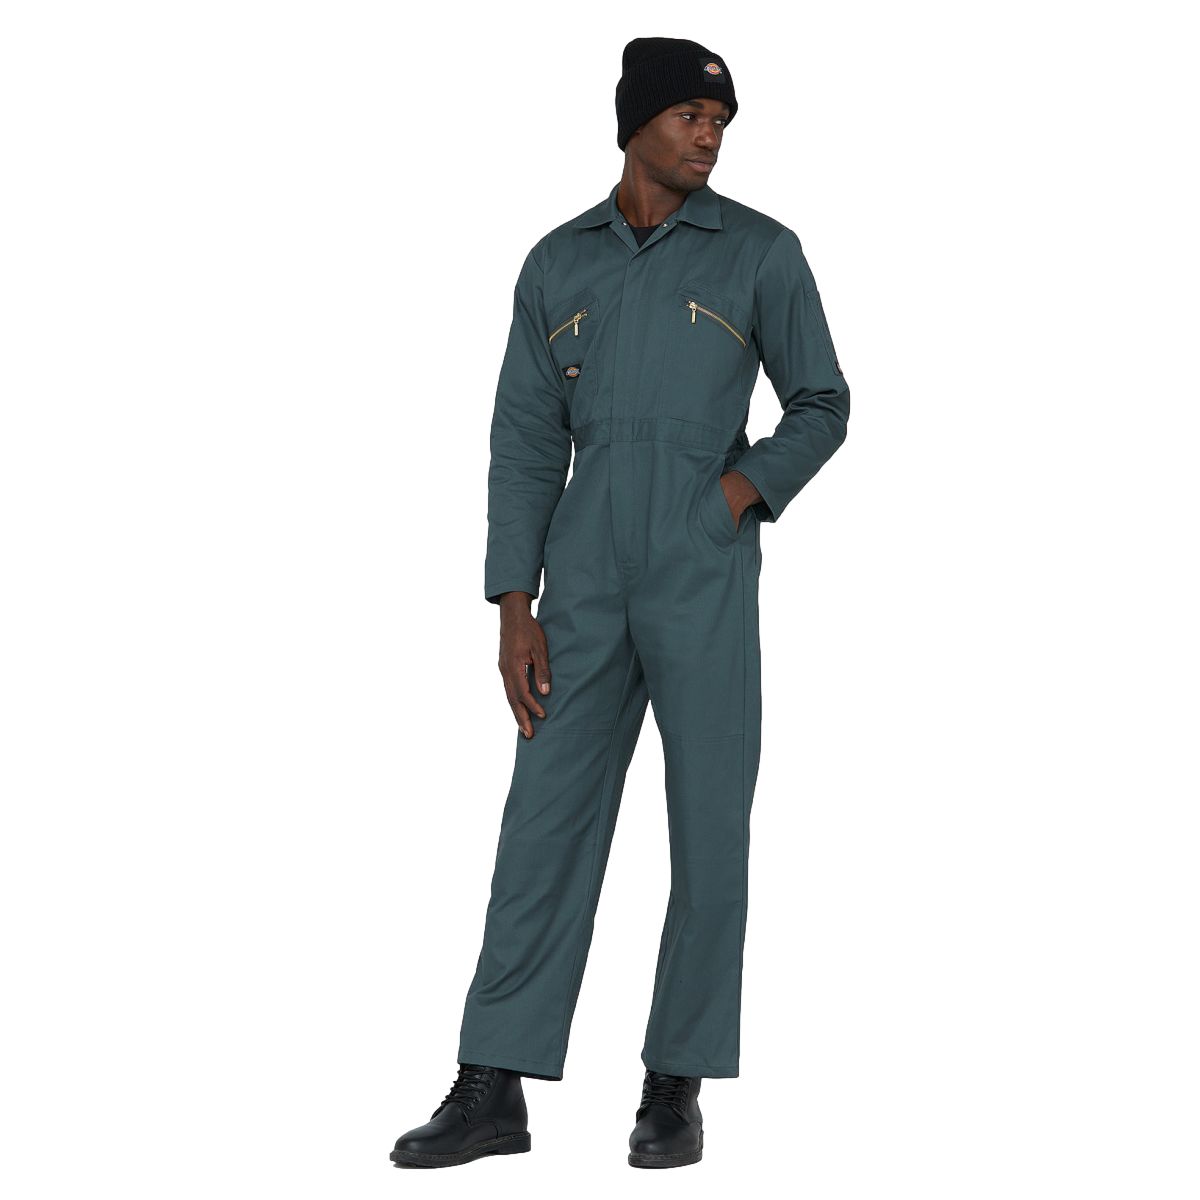 Combinaison Redhawk Coverhall Vert - Dickies - Taille S 3